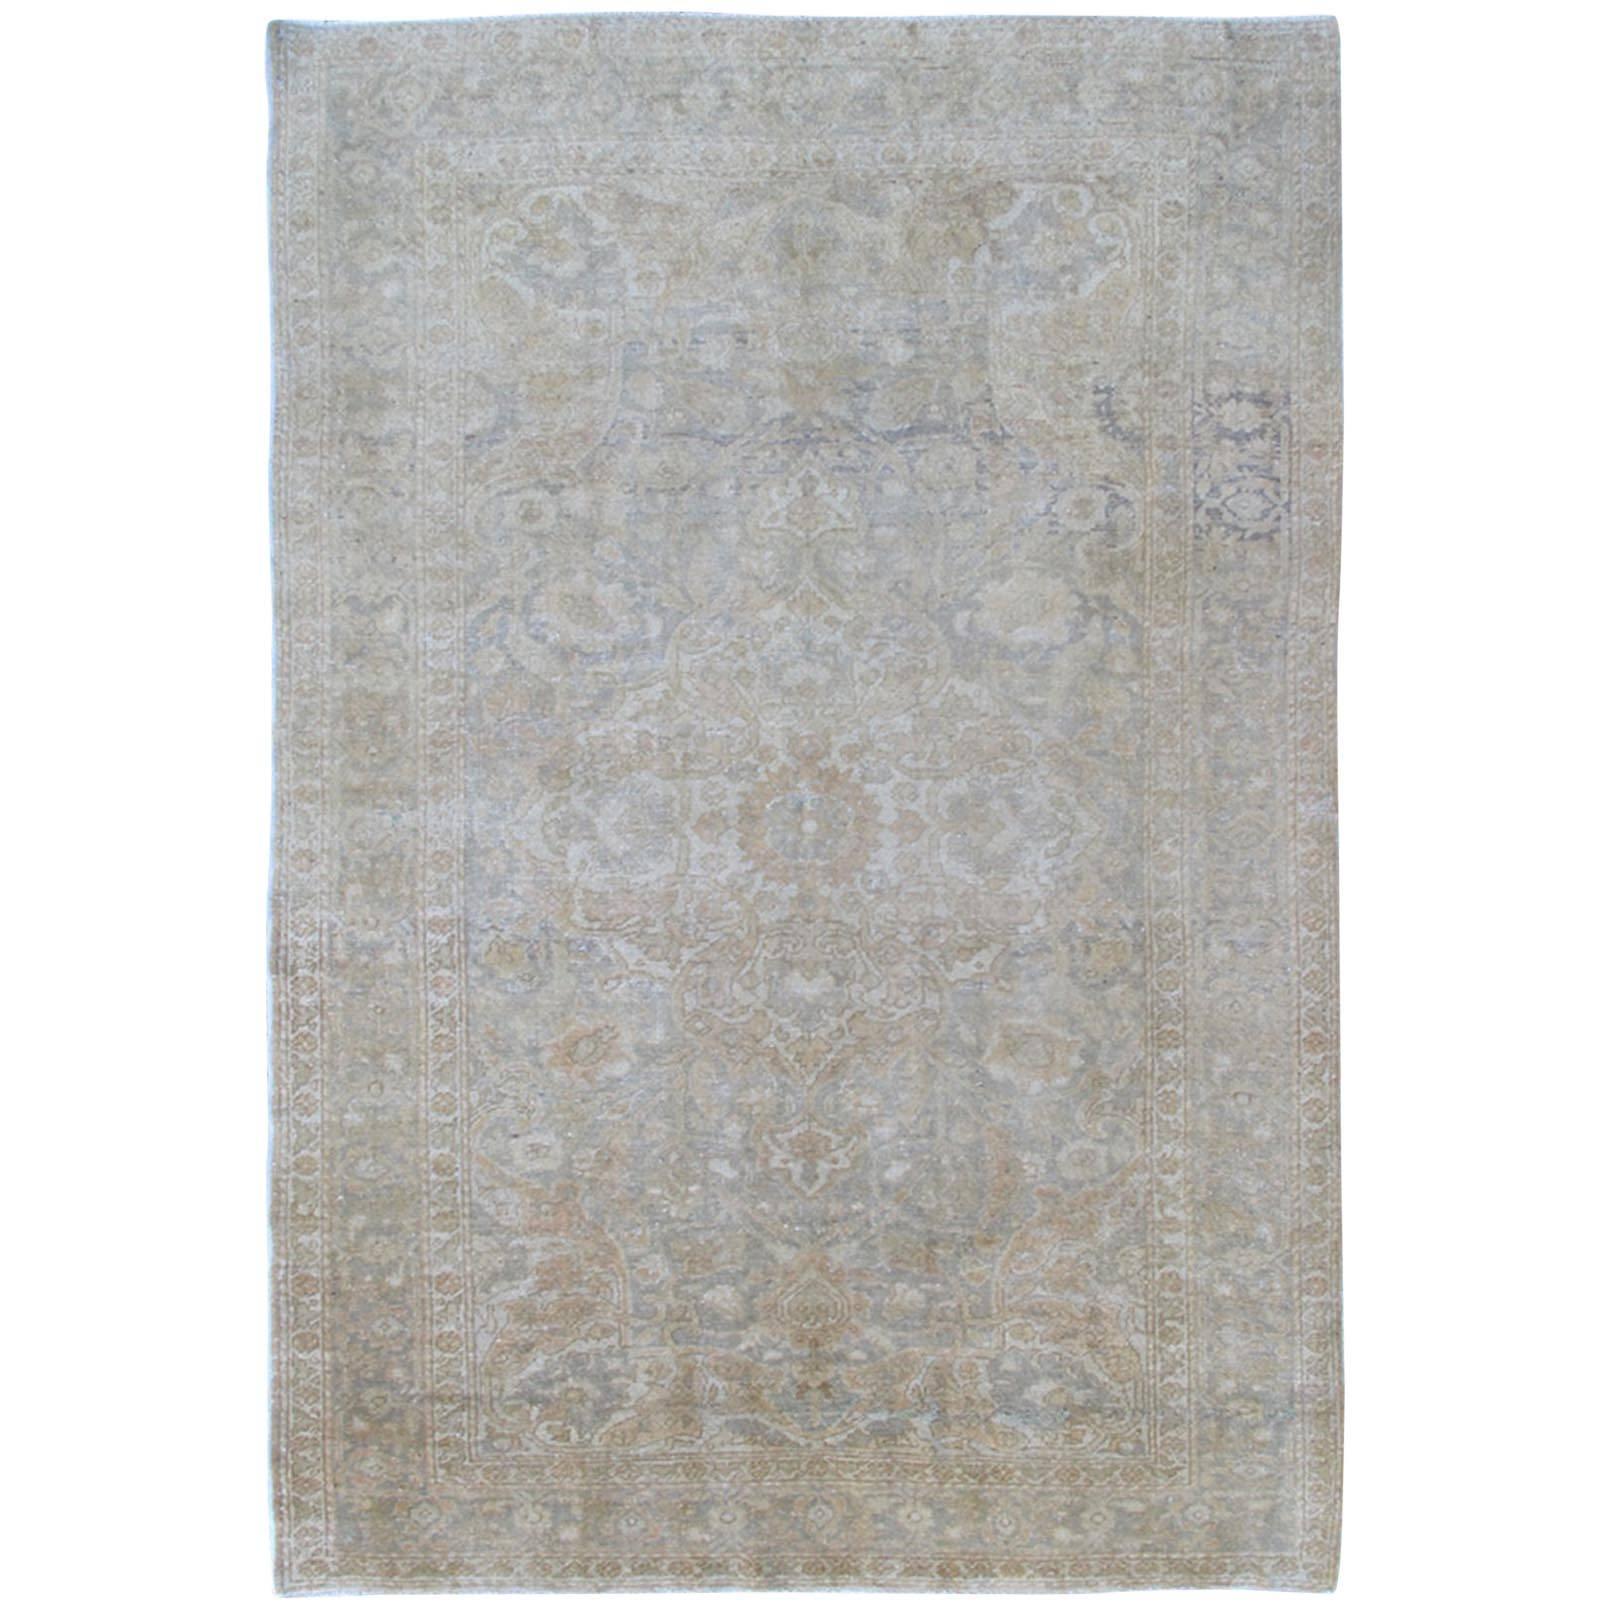 Gray Faded Vintage Turkish Sivas Rug with Floral Motifs and Medallion For Sale